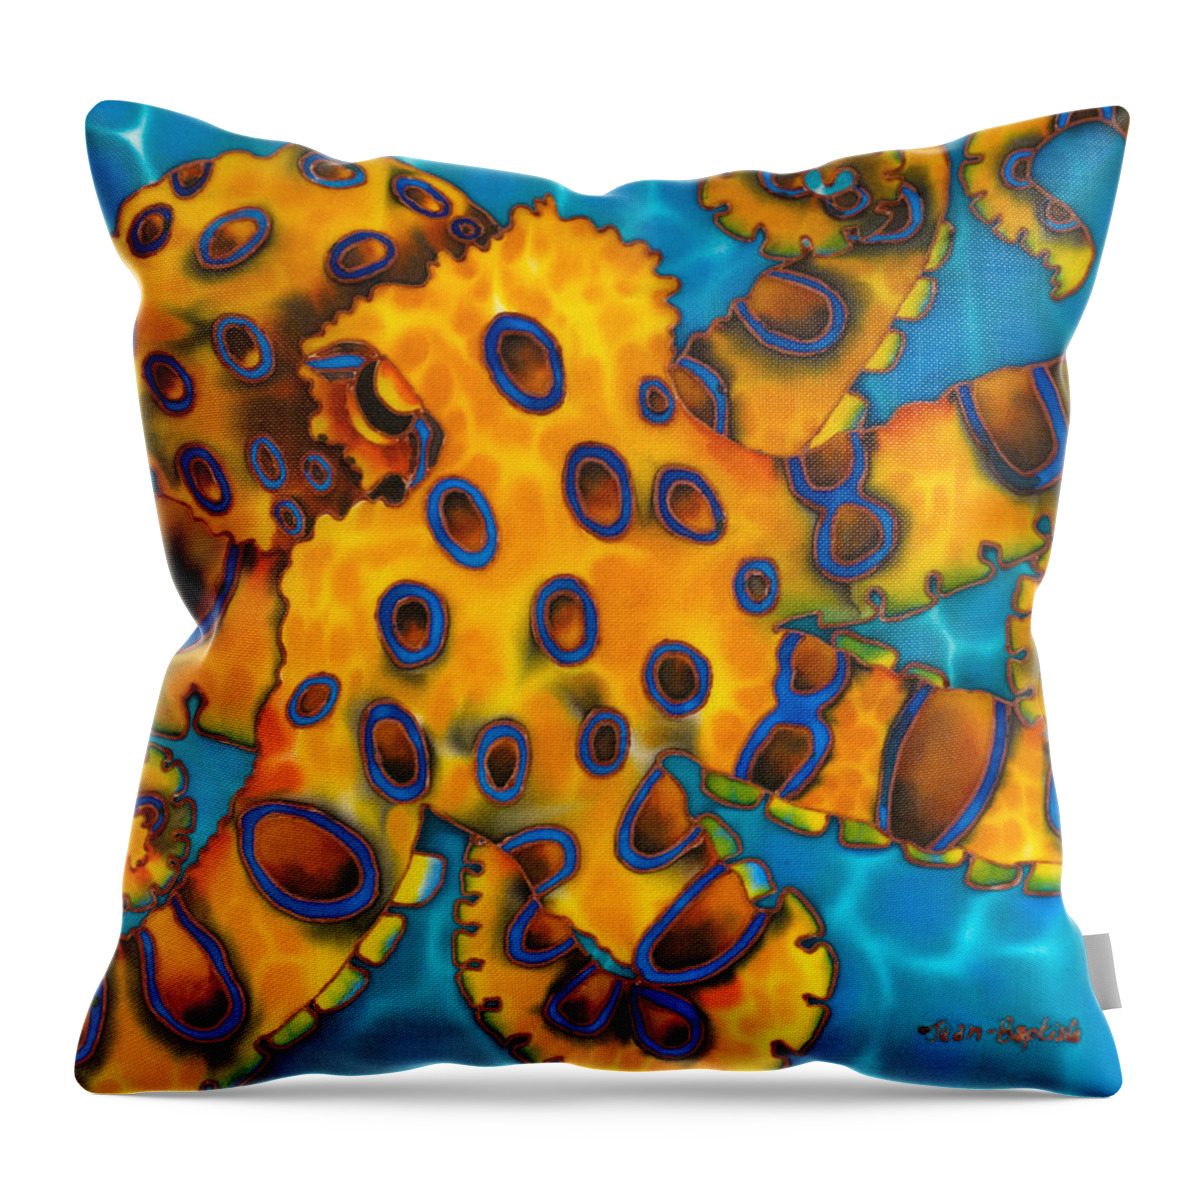 Octopus Throw Pillow featuring the painting Blue Ringed Octopust by Daniel Jean-Baptiste